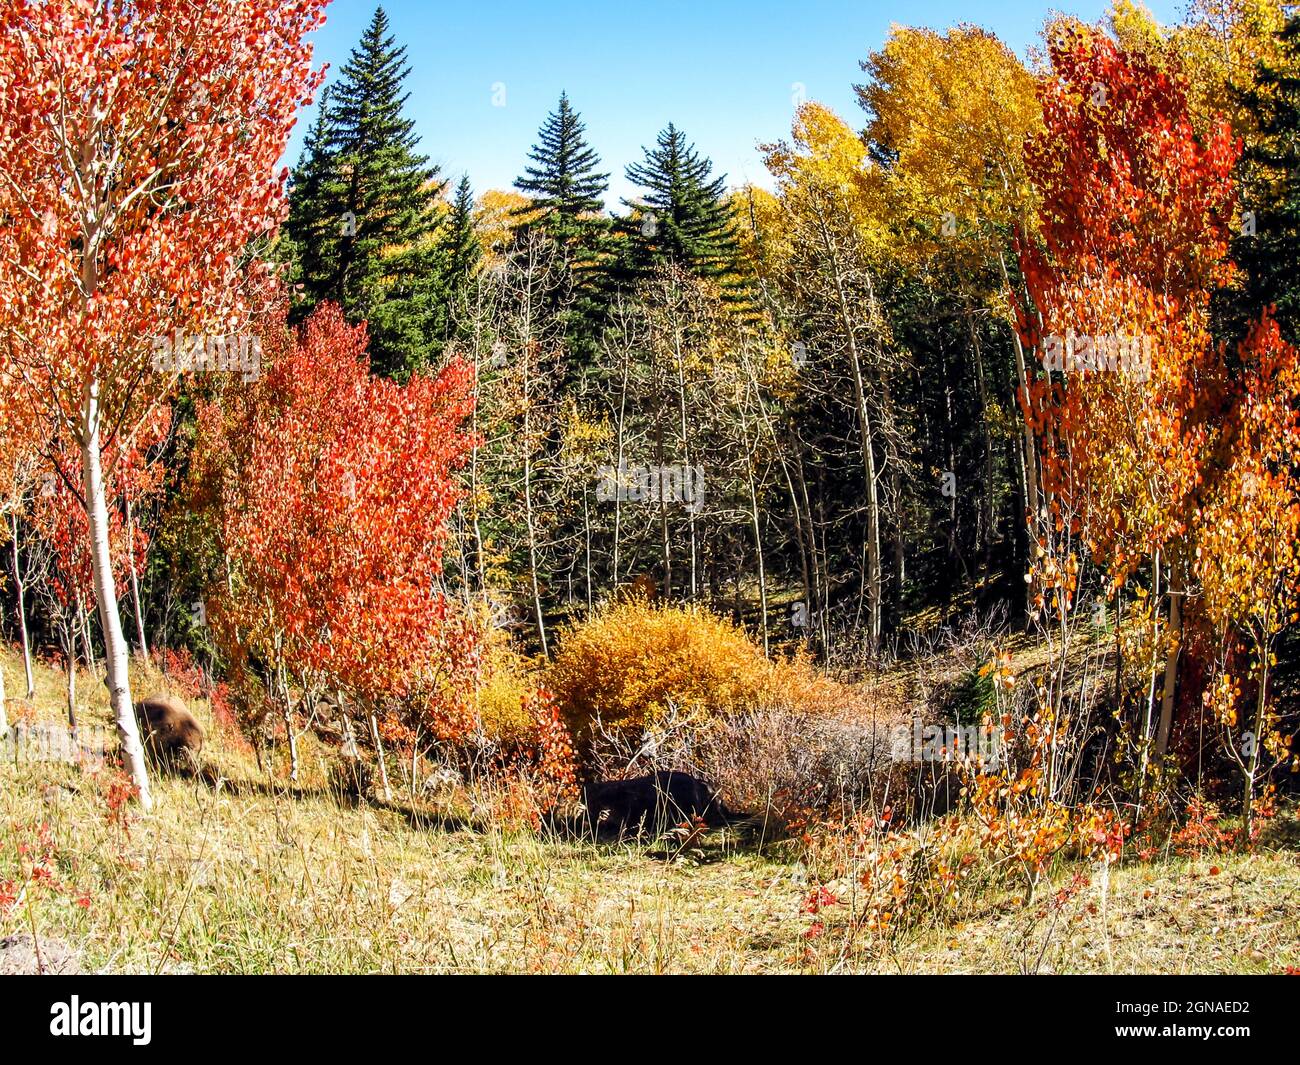 A Meadow with Quaking Aspen, Populus tremuloides, with their fall foliage, and Douglas Firs, Pseudotsuga menziesii, in the Dixie National Forest, Utah Stock Photo